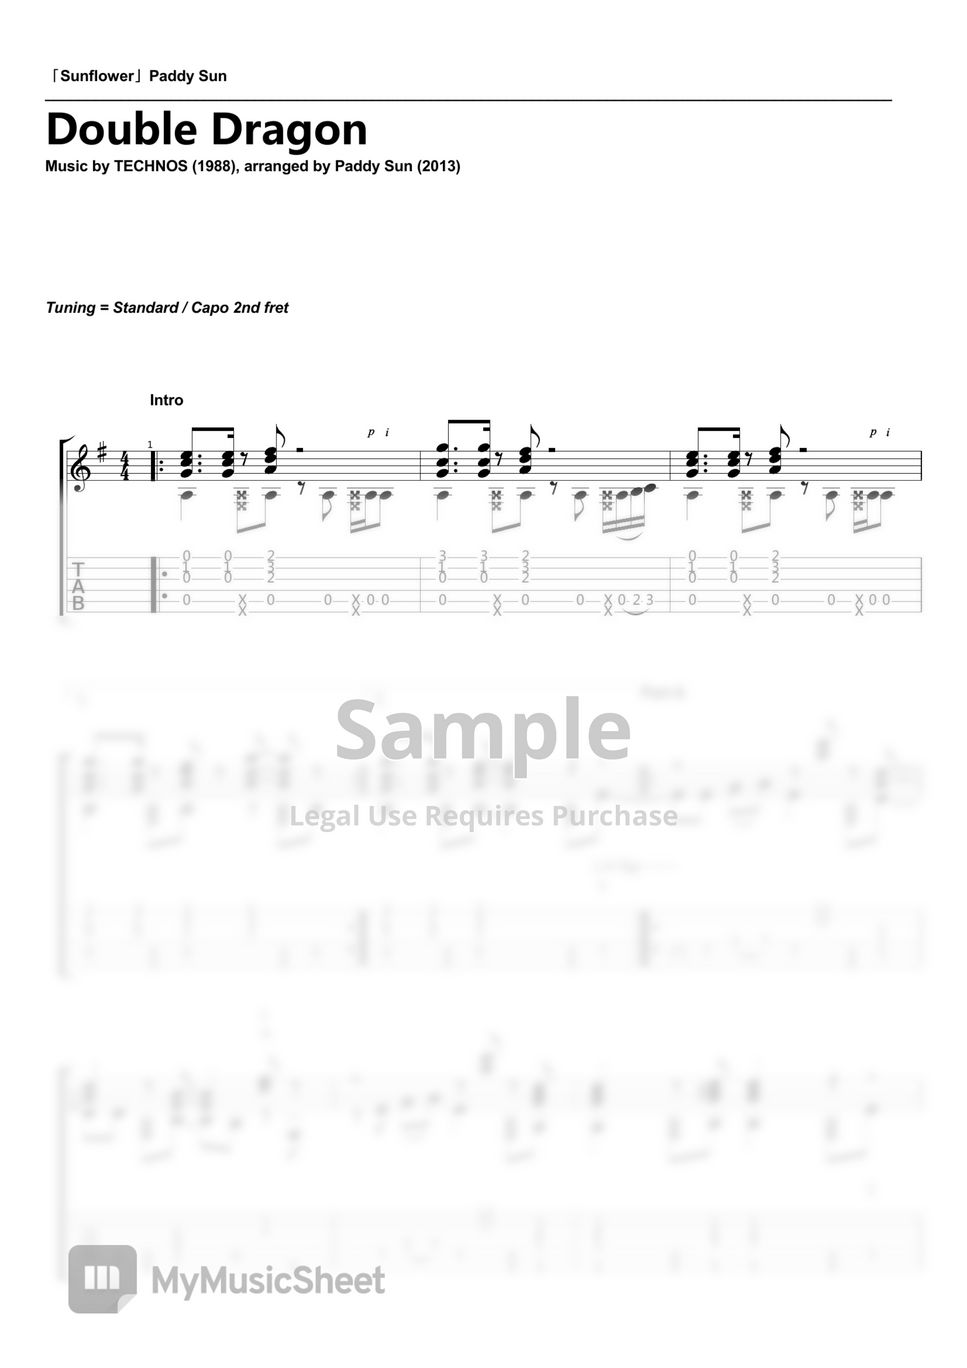 NES Game Music - Double Dragon (Fingerstyle Guitar) Arr. by Paddy Sun by Paddy Sun